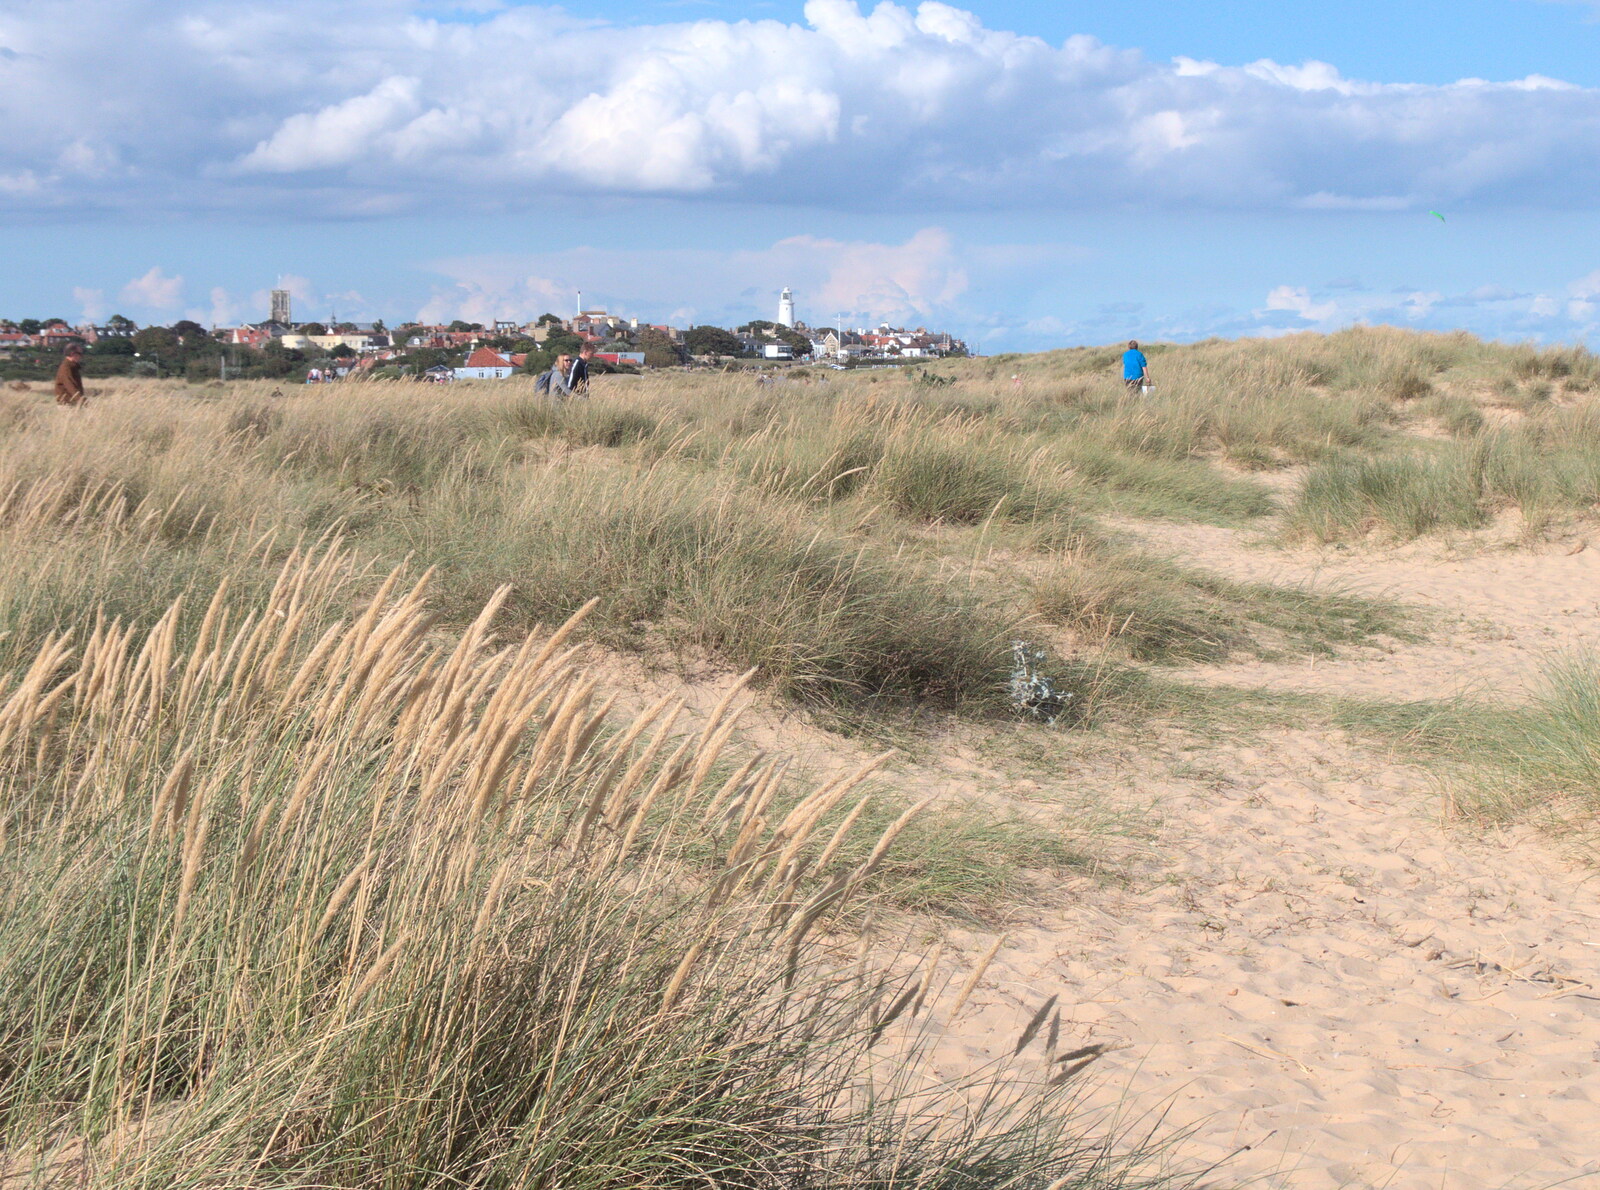 Southwold beyond the dunes from A Day on the Beach, Southwold, Suffolk - 25th August 2018